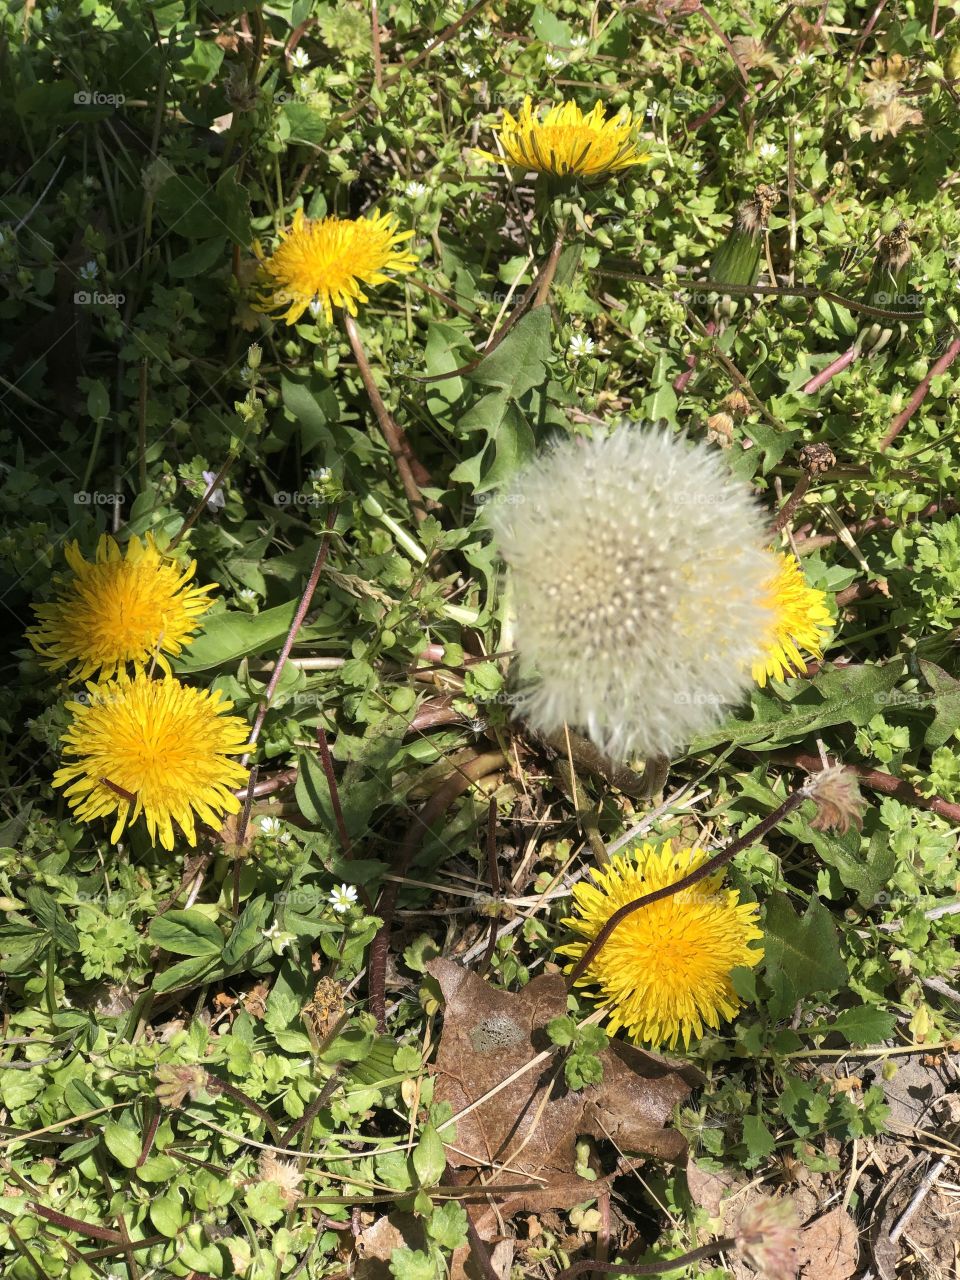 Dandelions on a spring day